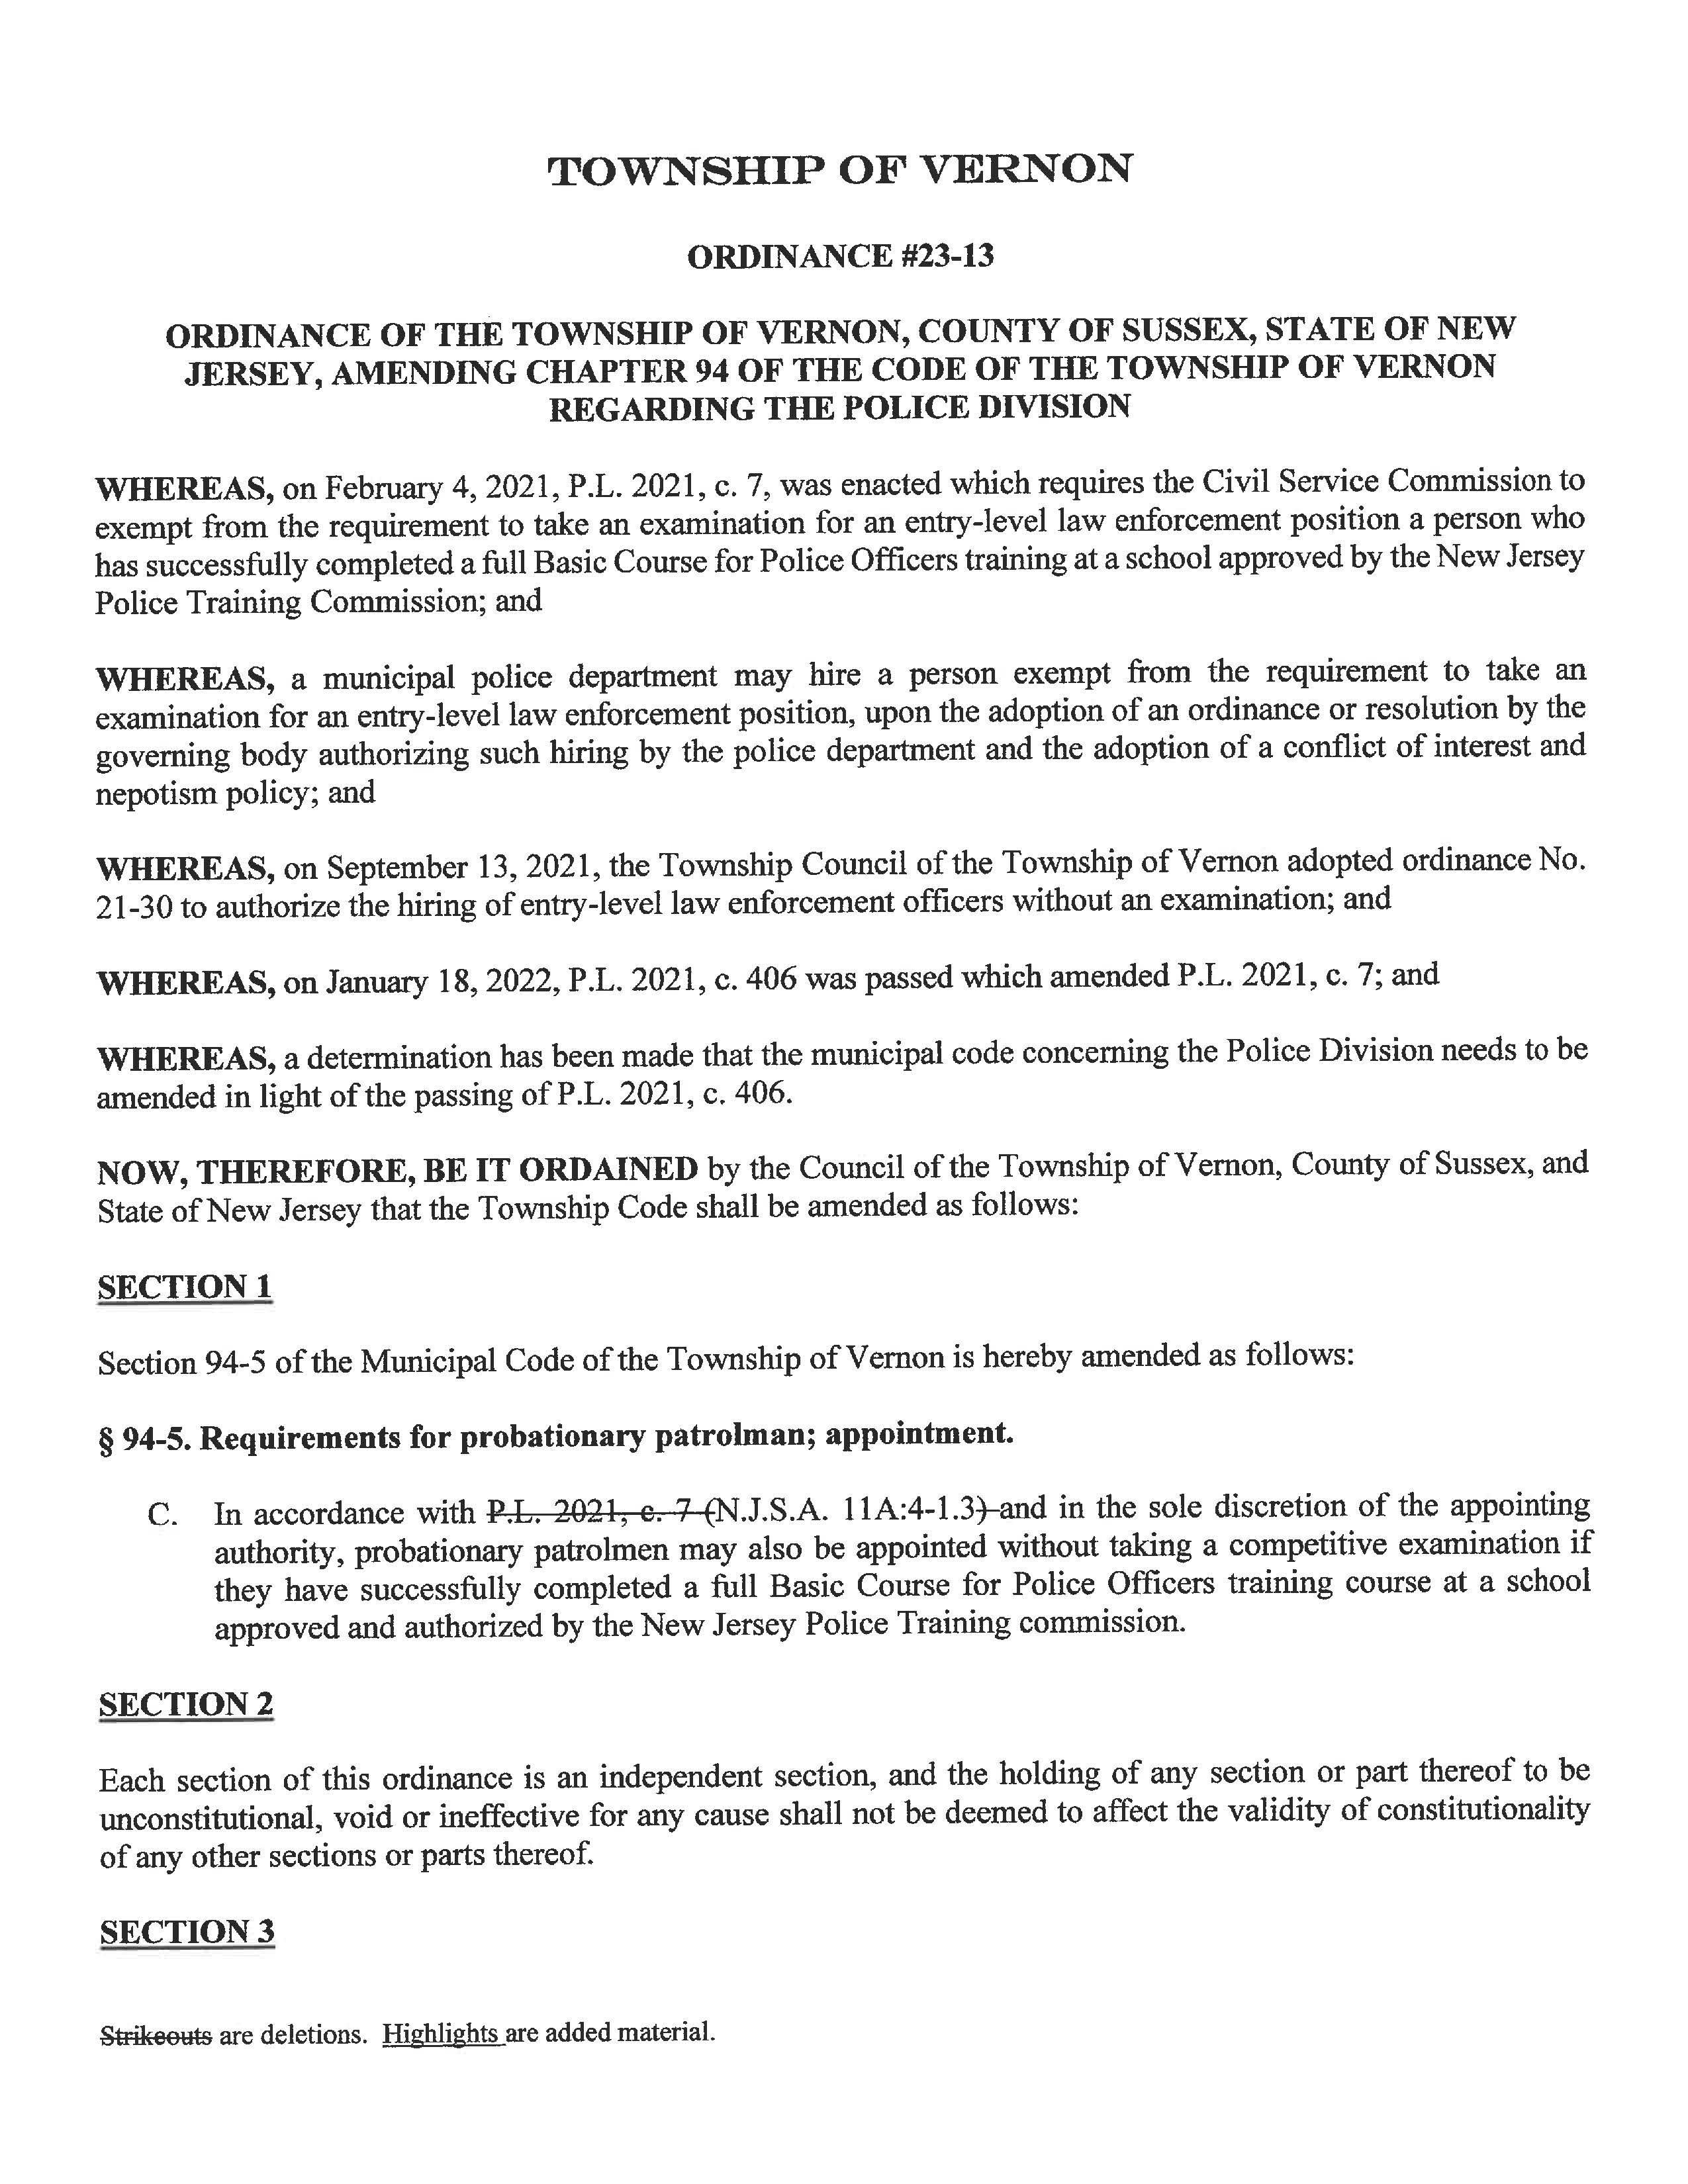 23 13 Amending the Township Code re Hiring for Police Division Page 1